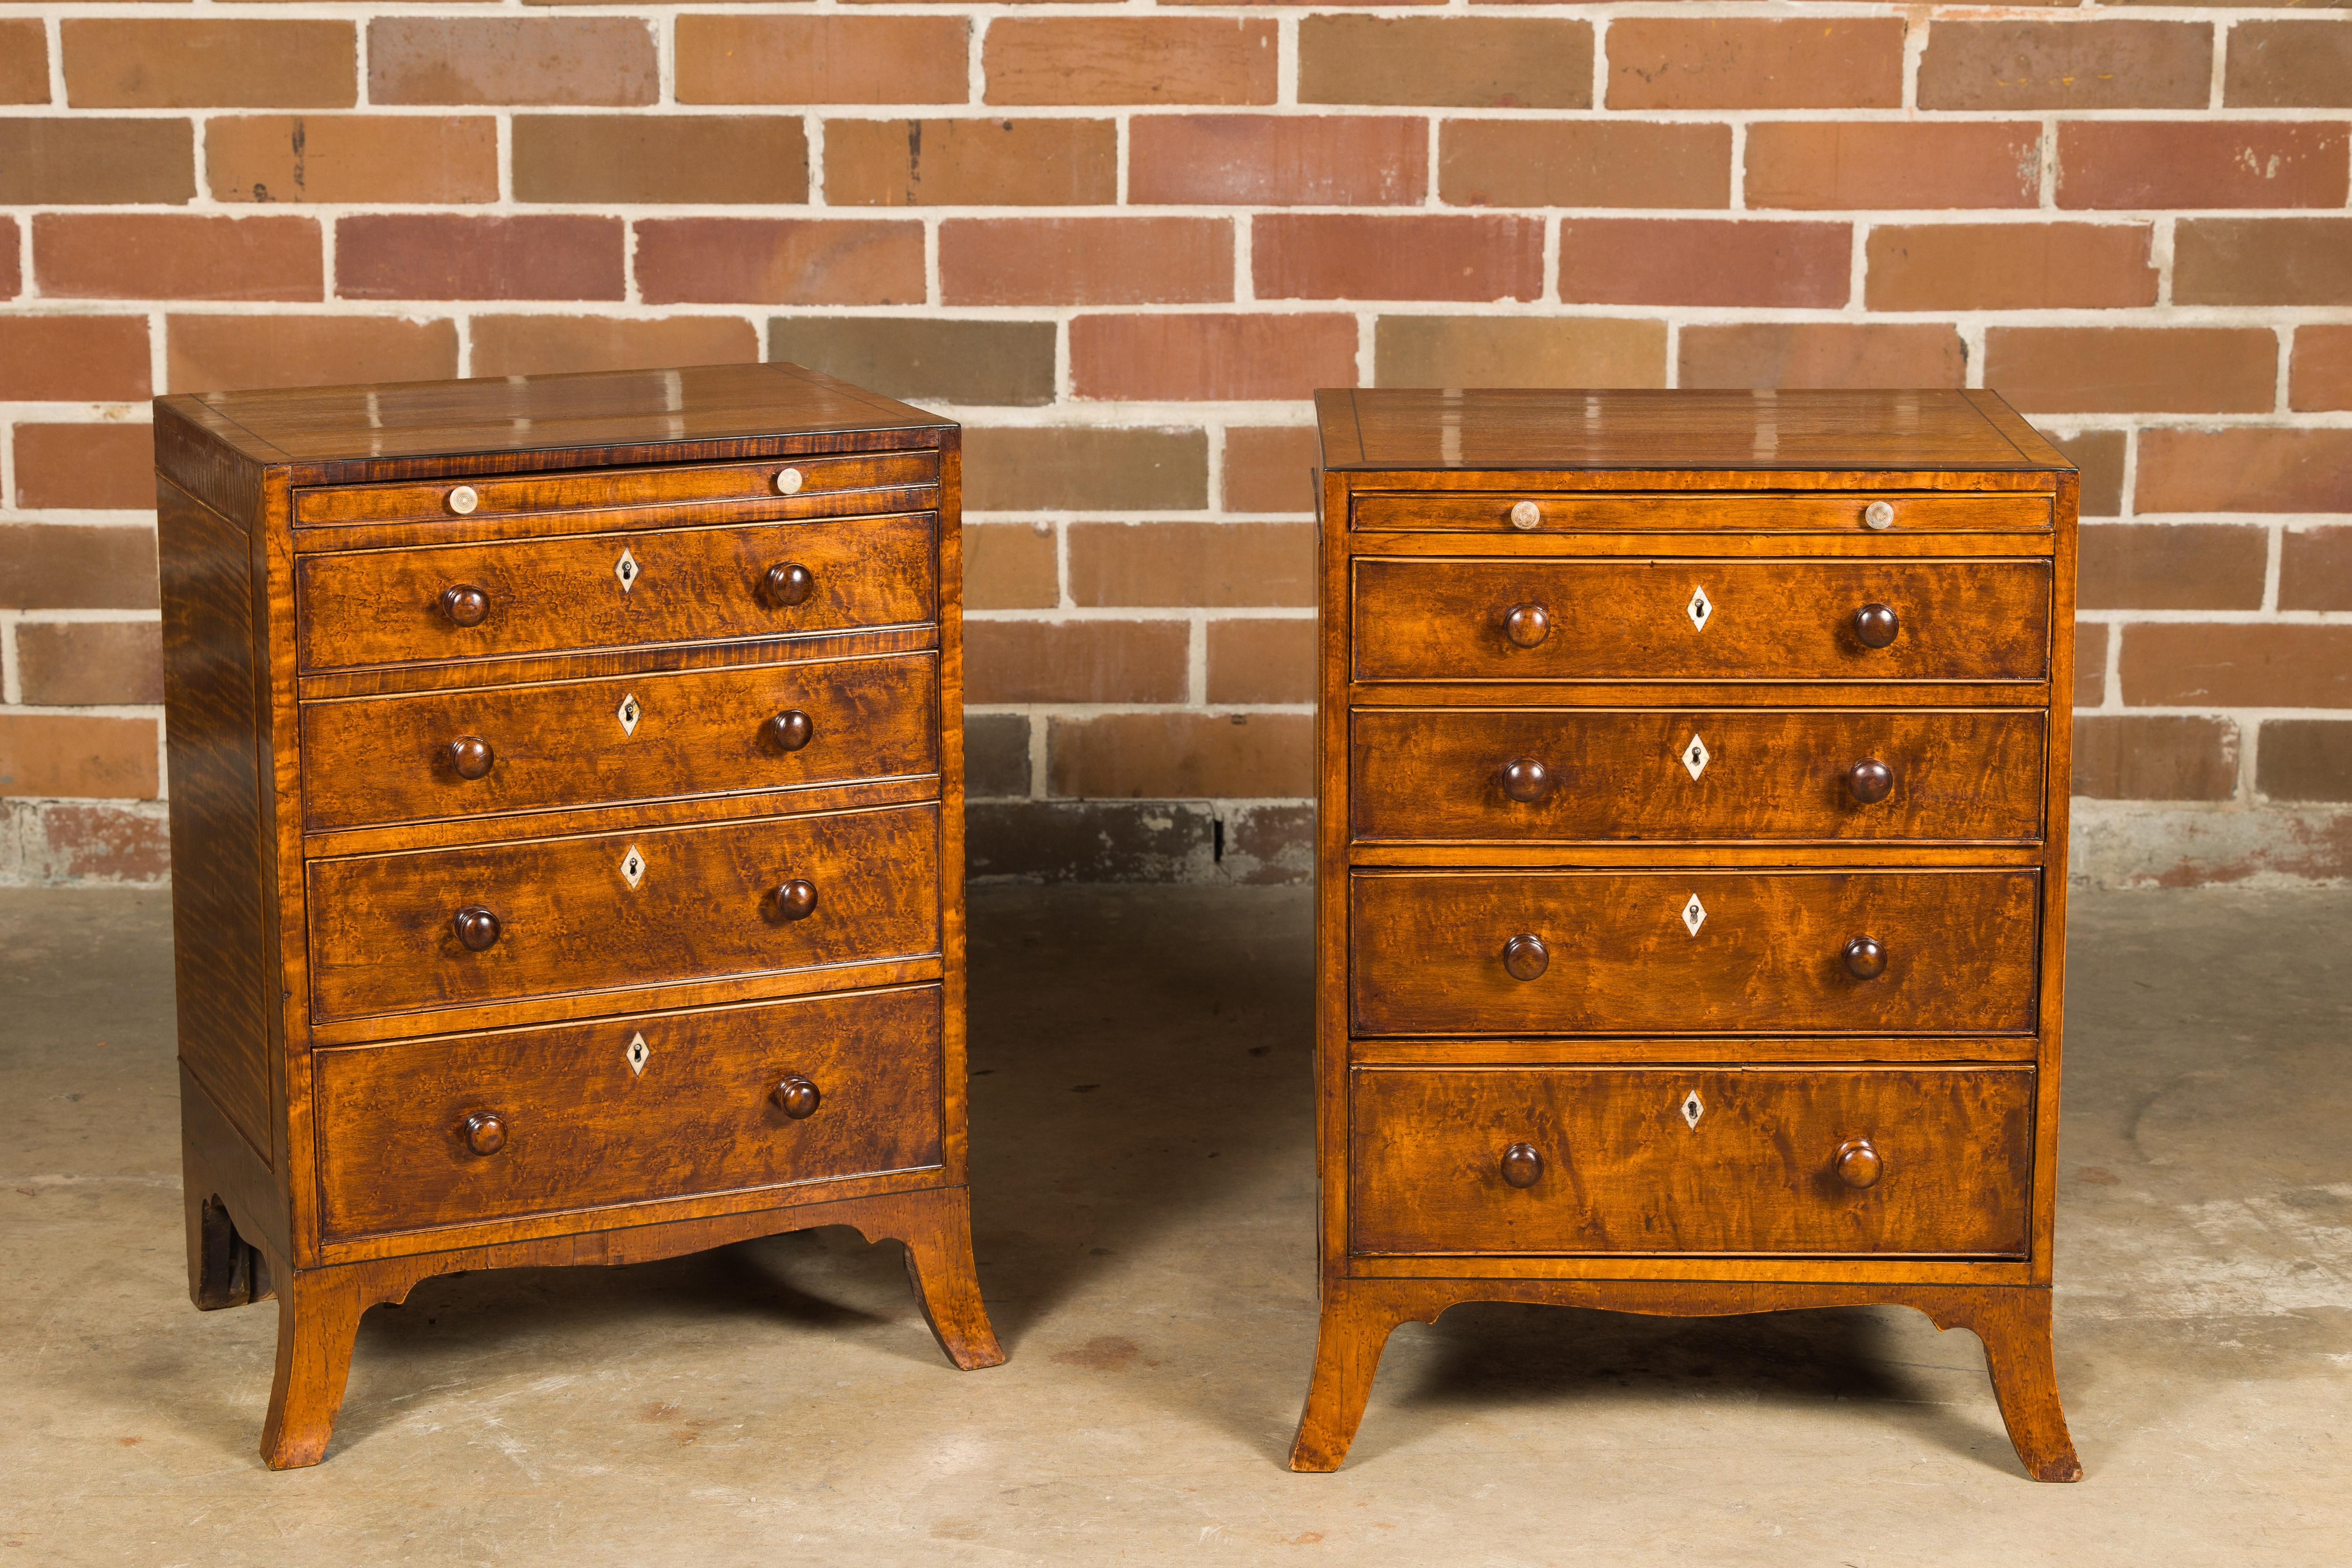 A pair of English Regency period bedside chests from circa 1820 with graduating drawers. These exquisite English Regency period bedside chests, dating back to around 1820, are a testament to the elegance and craftsmanship of their era. Crafted with